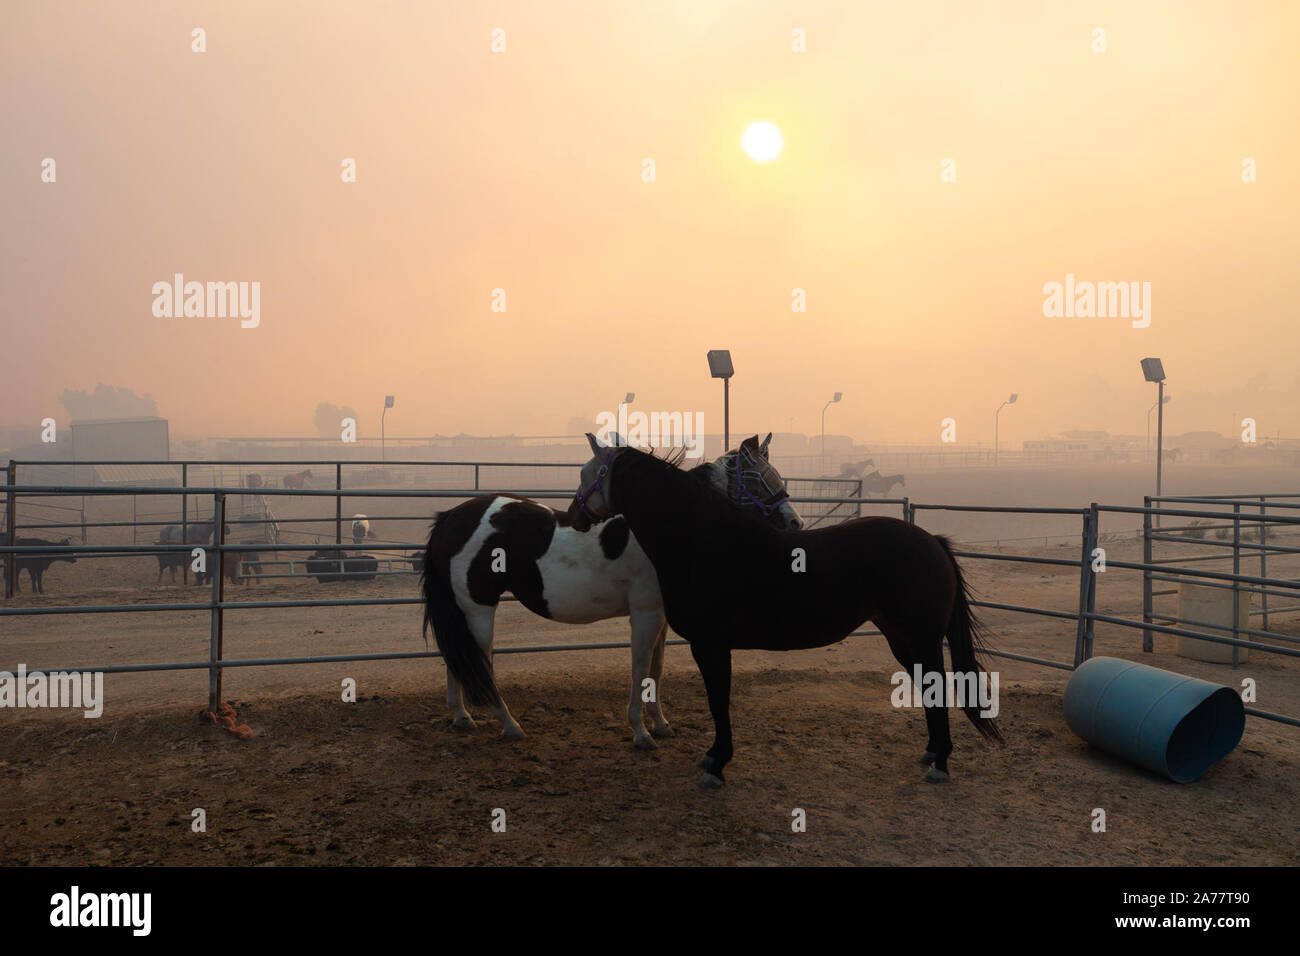 Simi Valley, California, USA. 30th Oct, 2019. Horses are seen in Simi Valley, the United States, Oct. 30, 2019. An aggressive wildfire erupted Wednesday morning on the hillsides above Simi Valley, triggering a new round of evacuation in Southern California. The blaze, dubbed Easy Fire, was first reported around 6:15 a.m. local time, then spread to about 972 acres as of 9 a.m., Ventura County fire Capt. Brian McGrath told local KTLA news channel. Firefighters raced to protect the Ronald Reagan Presidential Library nearby as a thin wall of flames approached from hills. Credit: Xinhua/Alamy Live  Stock Photo